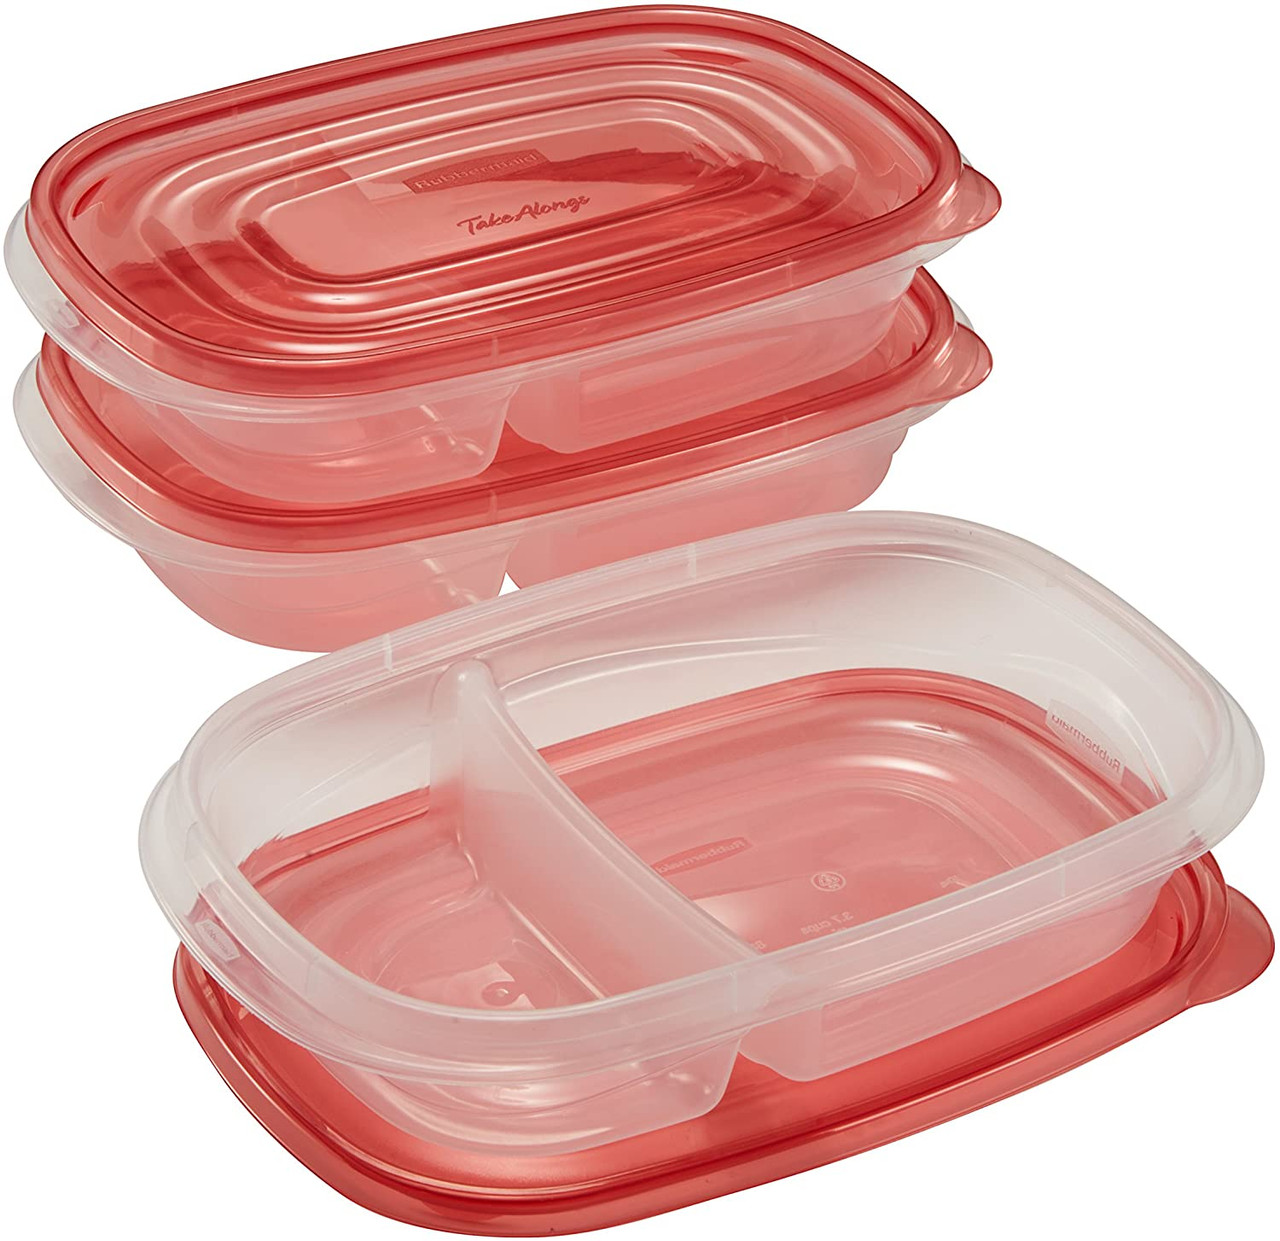  Rubbermaid TakeAlongs Serving Bowl Food Storage Containers,  15.7 Cup, Tint Chili, 2 Count : Home & Kitchen